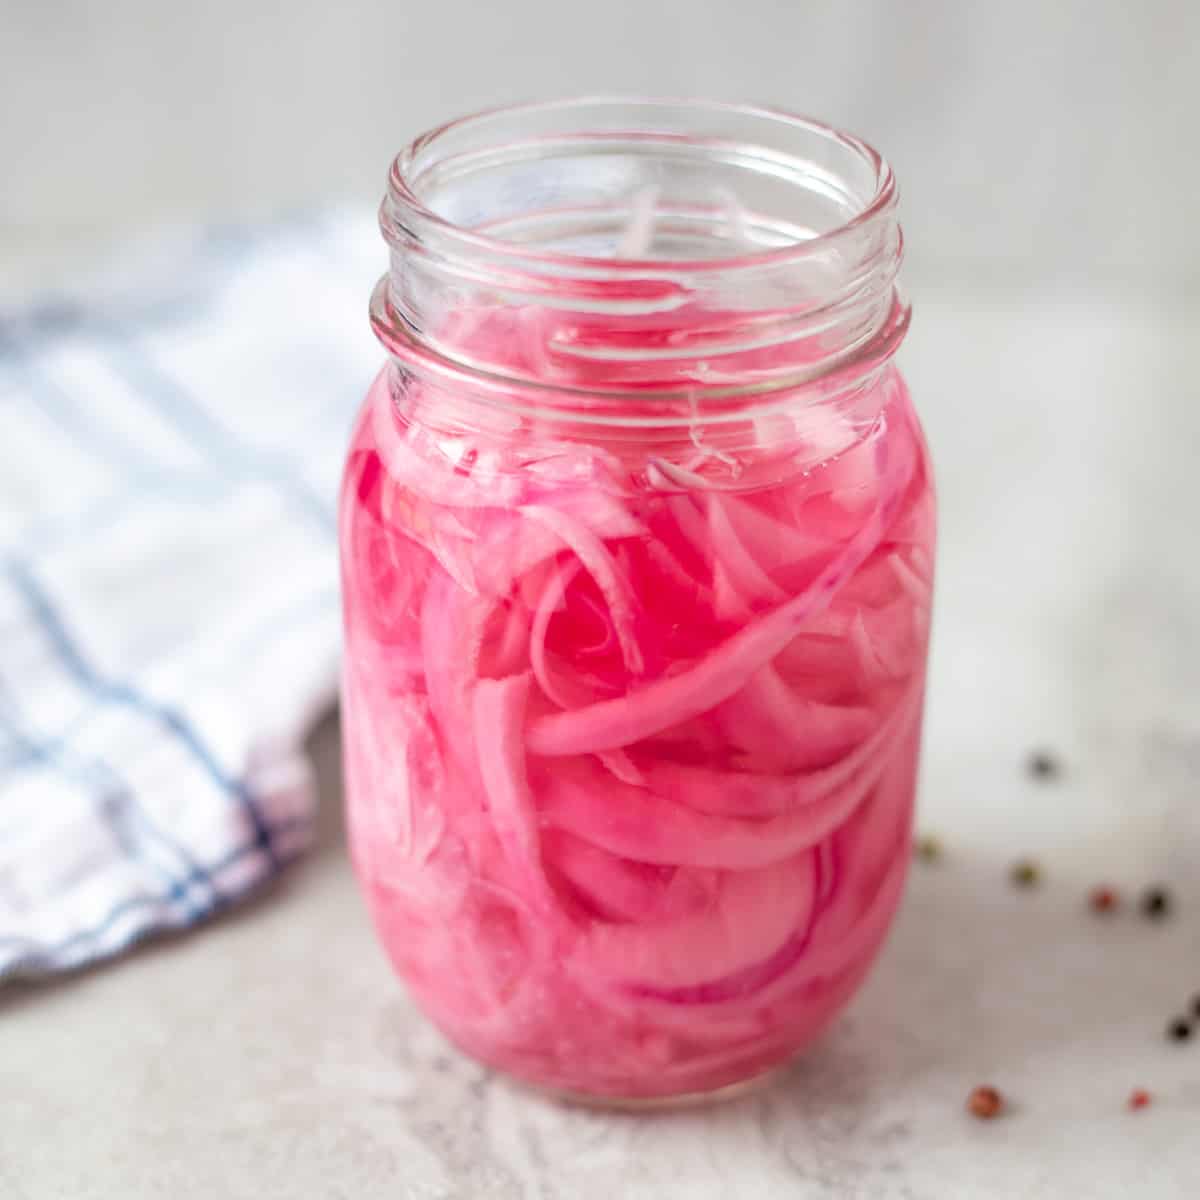 Jar on counter with pickled red onions.